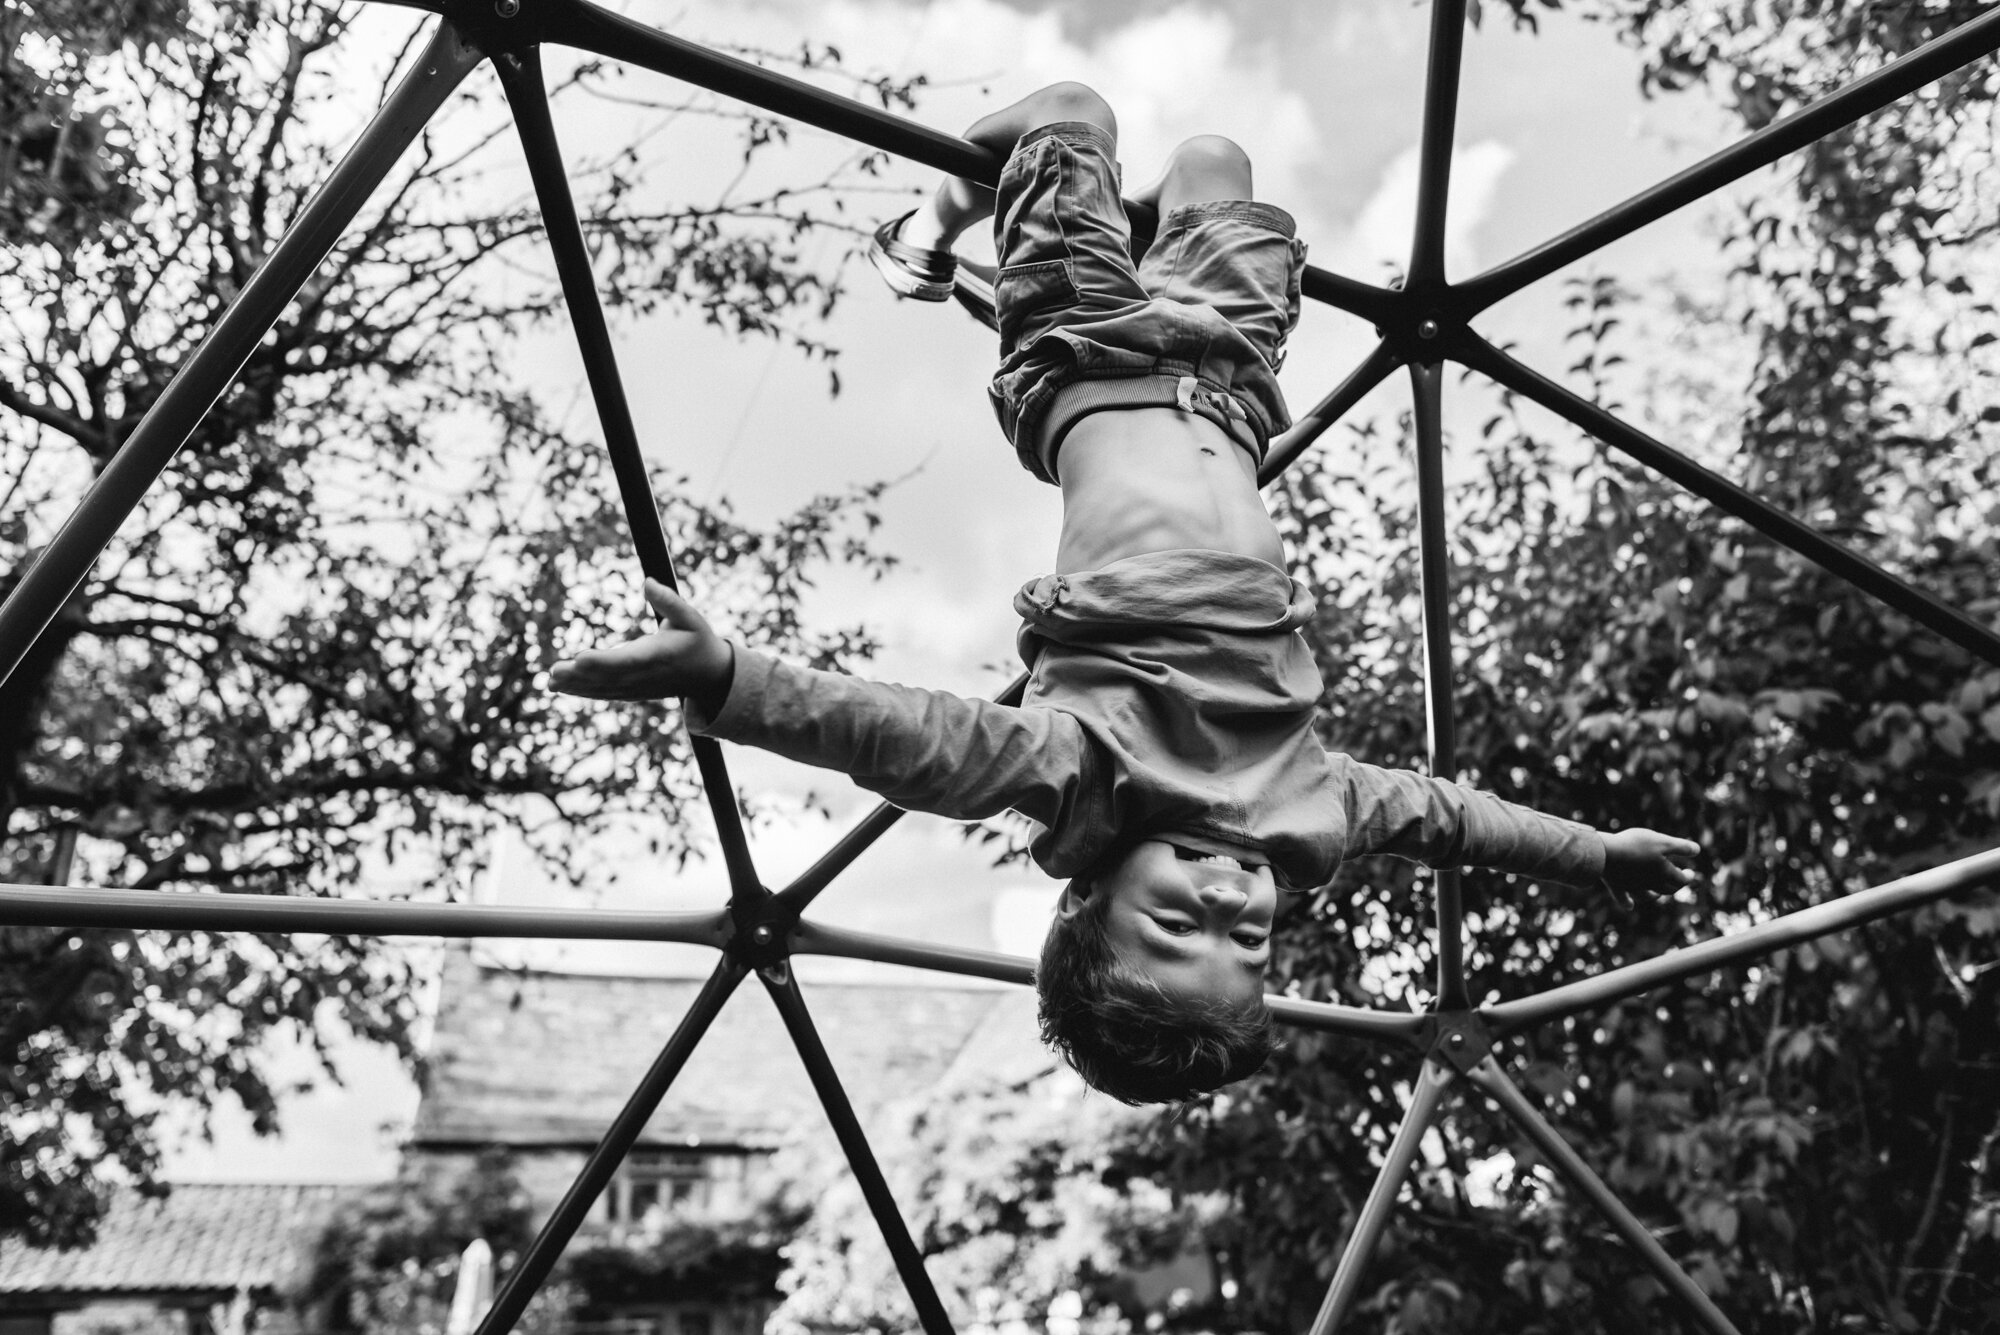  Black and white photograph of a child hanging upside-down on a metal dome climbing frame in the garden. 